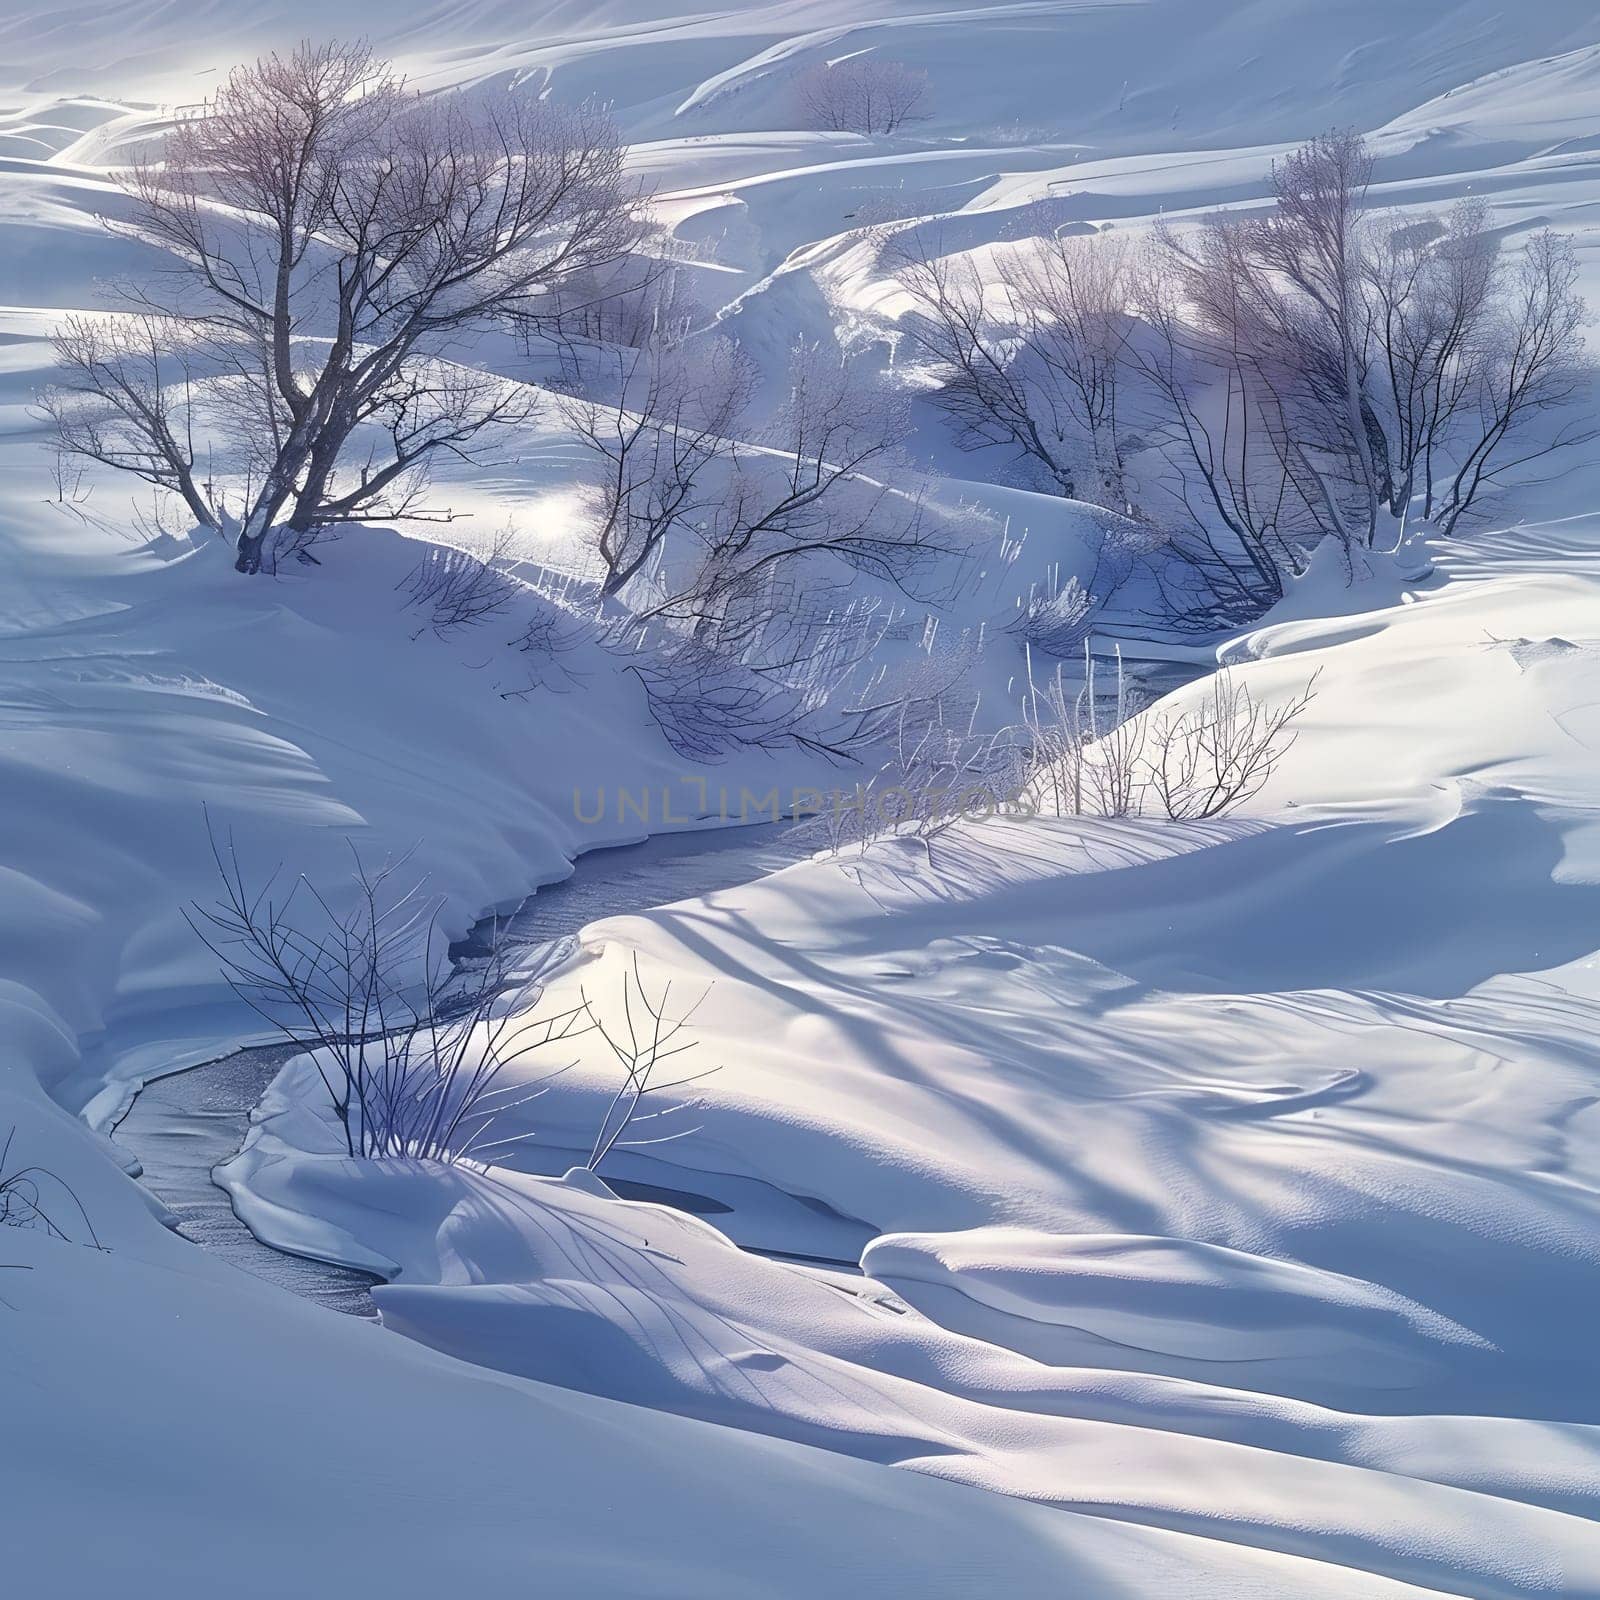 A picturesque snowy landscape with a stream flowing through a mountain slope, creating a freezing natural landscape. Trees are scattered along the icy cap, enhancing the geological phenomenon